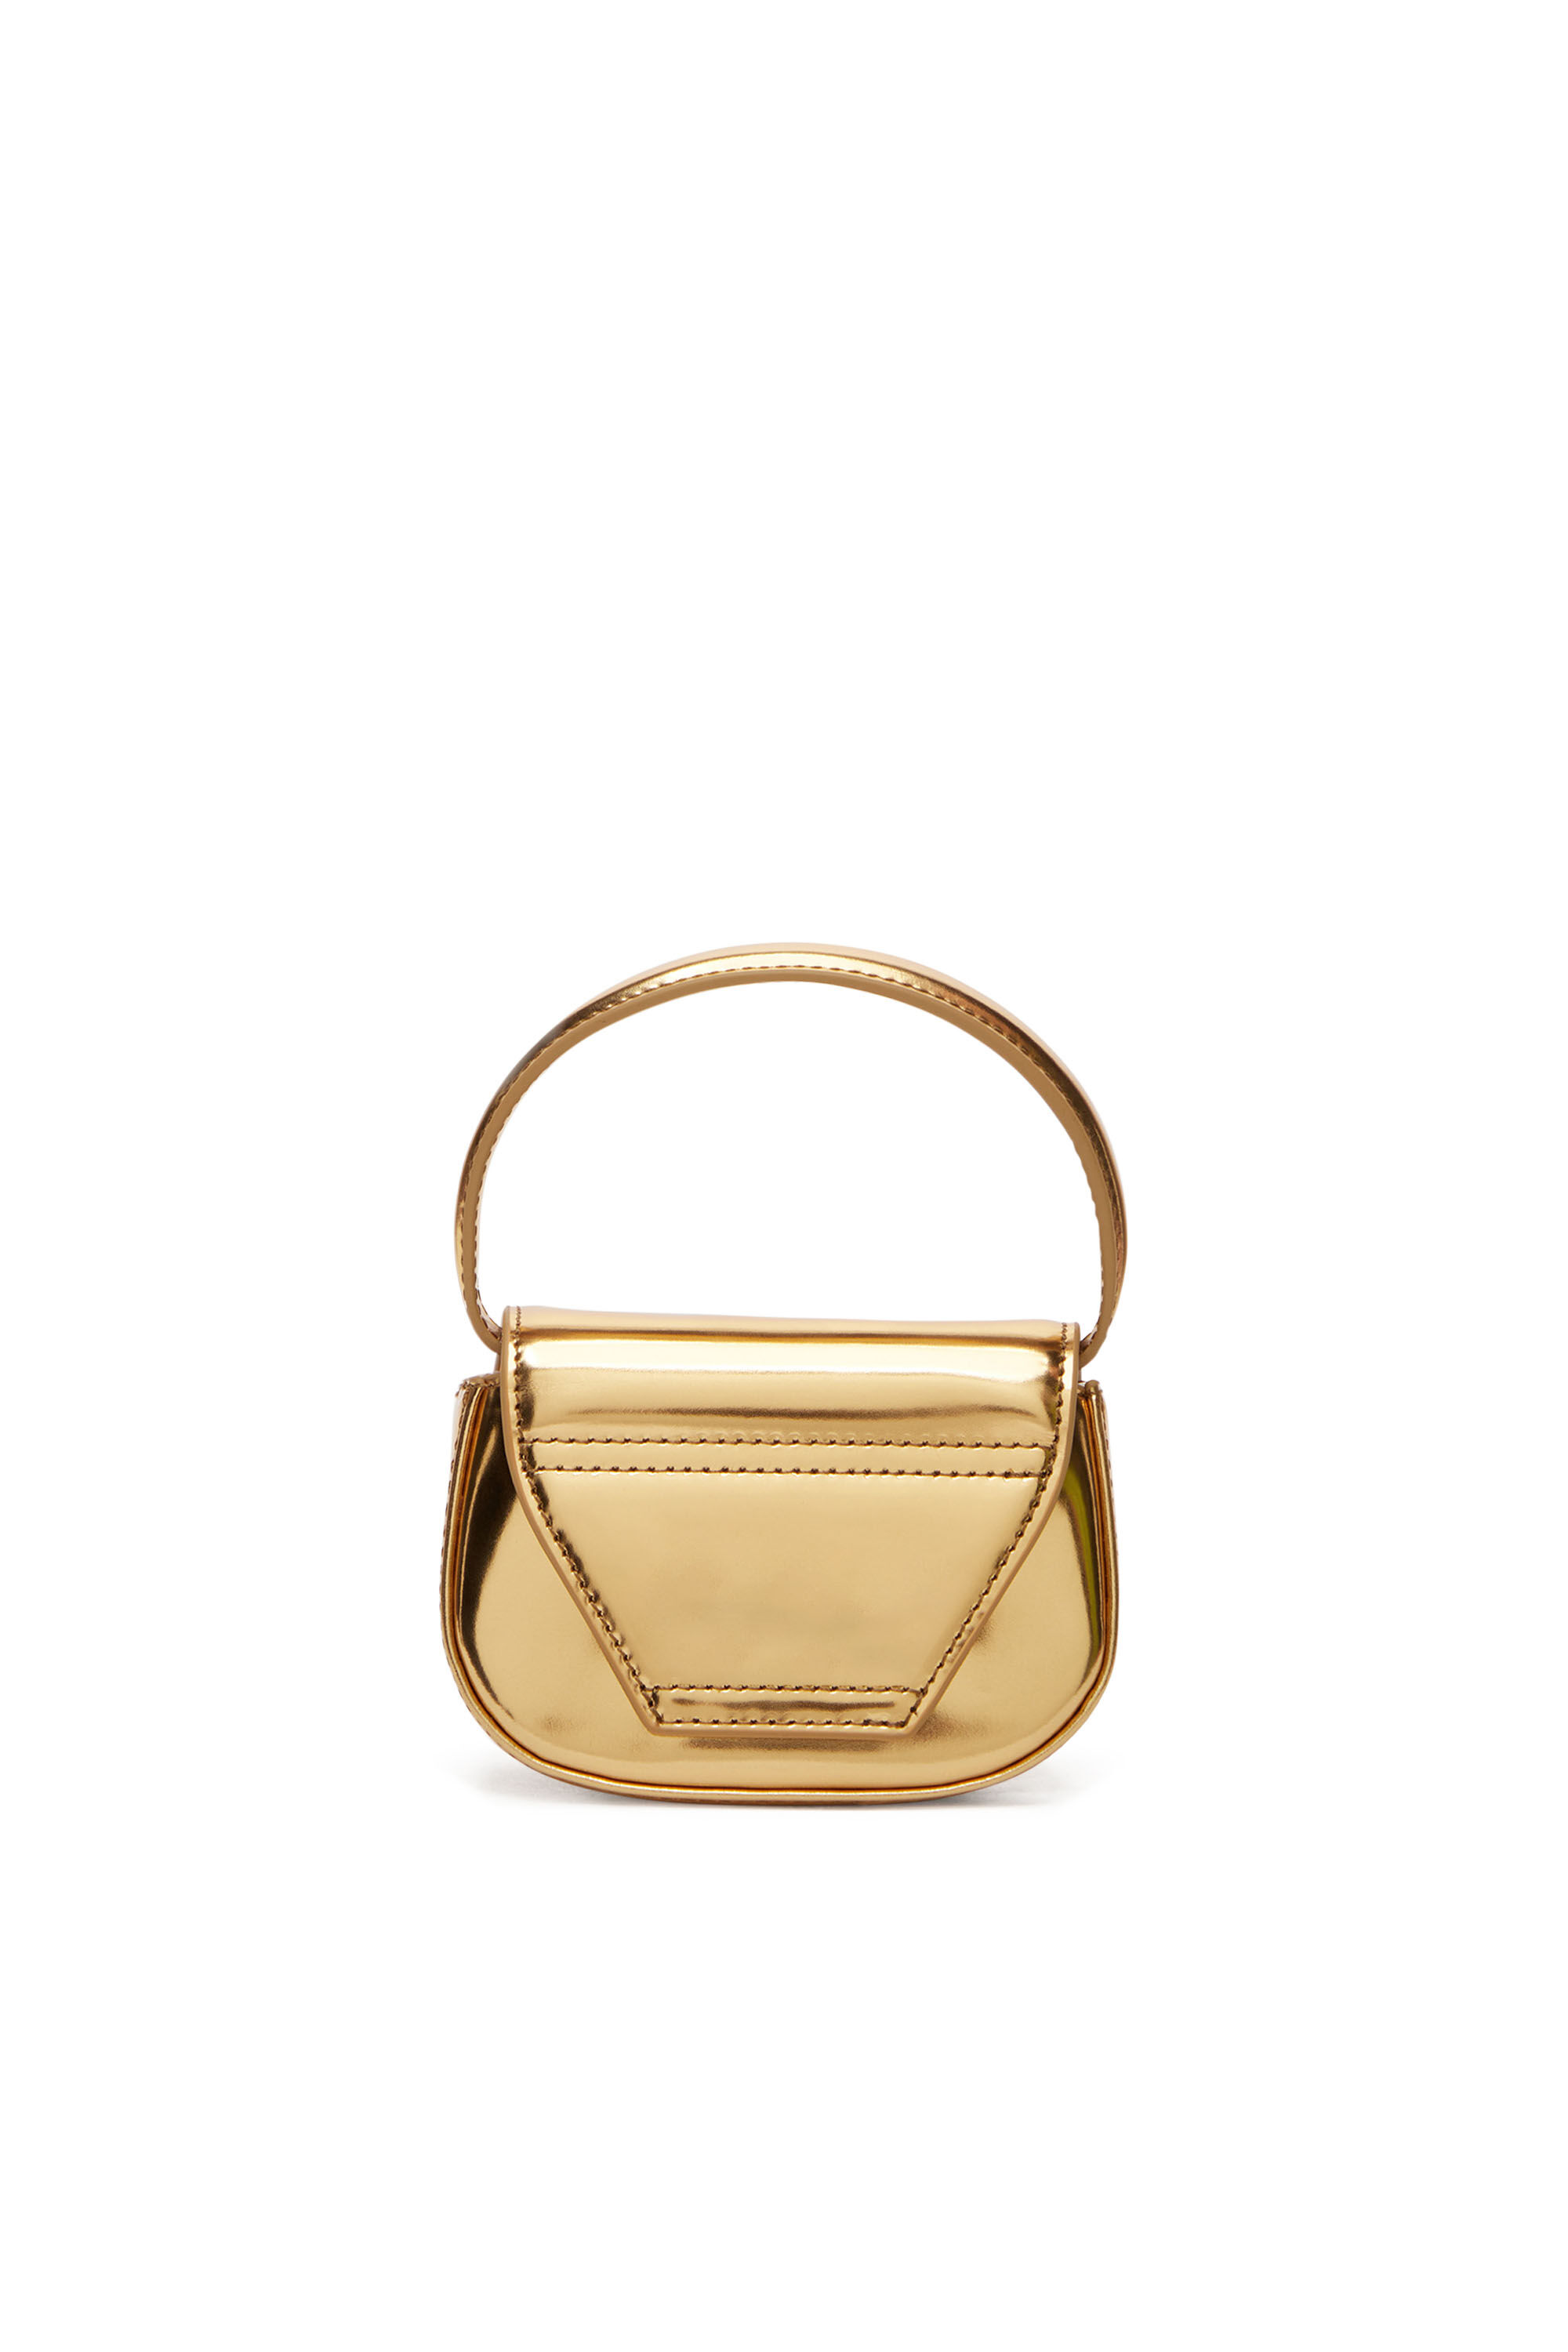 Diesel - 1DR-XS-S, Woman 1DR-XS-S-Iconic mini bag in mirrored leather in Oro - Image 3